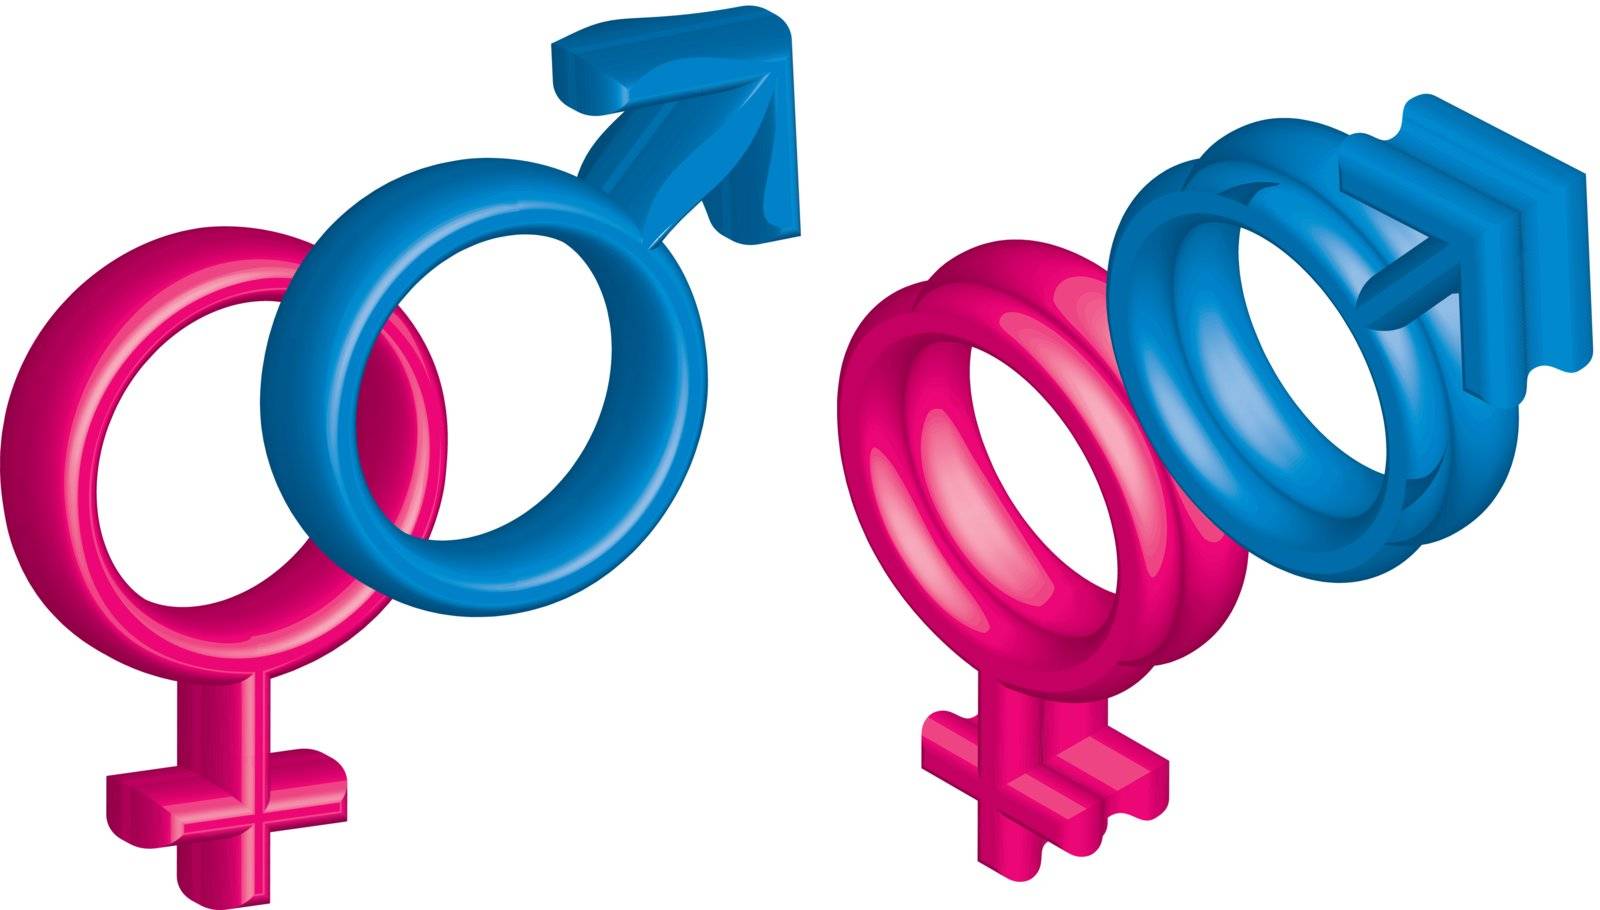 3d man and woman signs over white background. vector